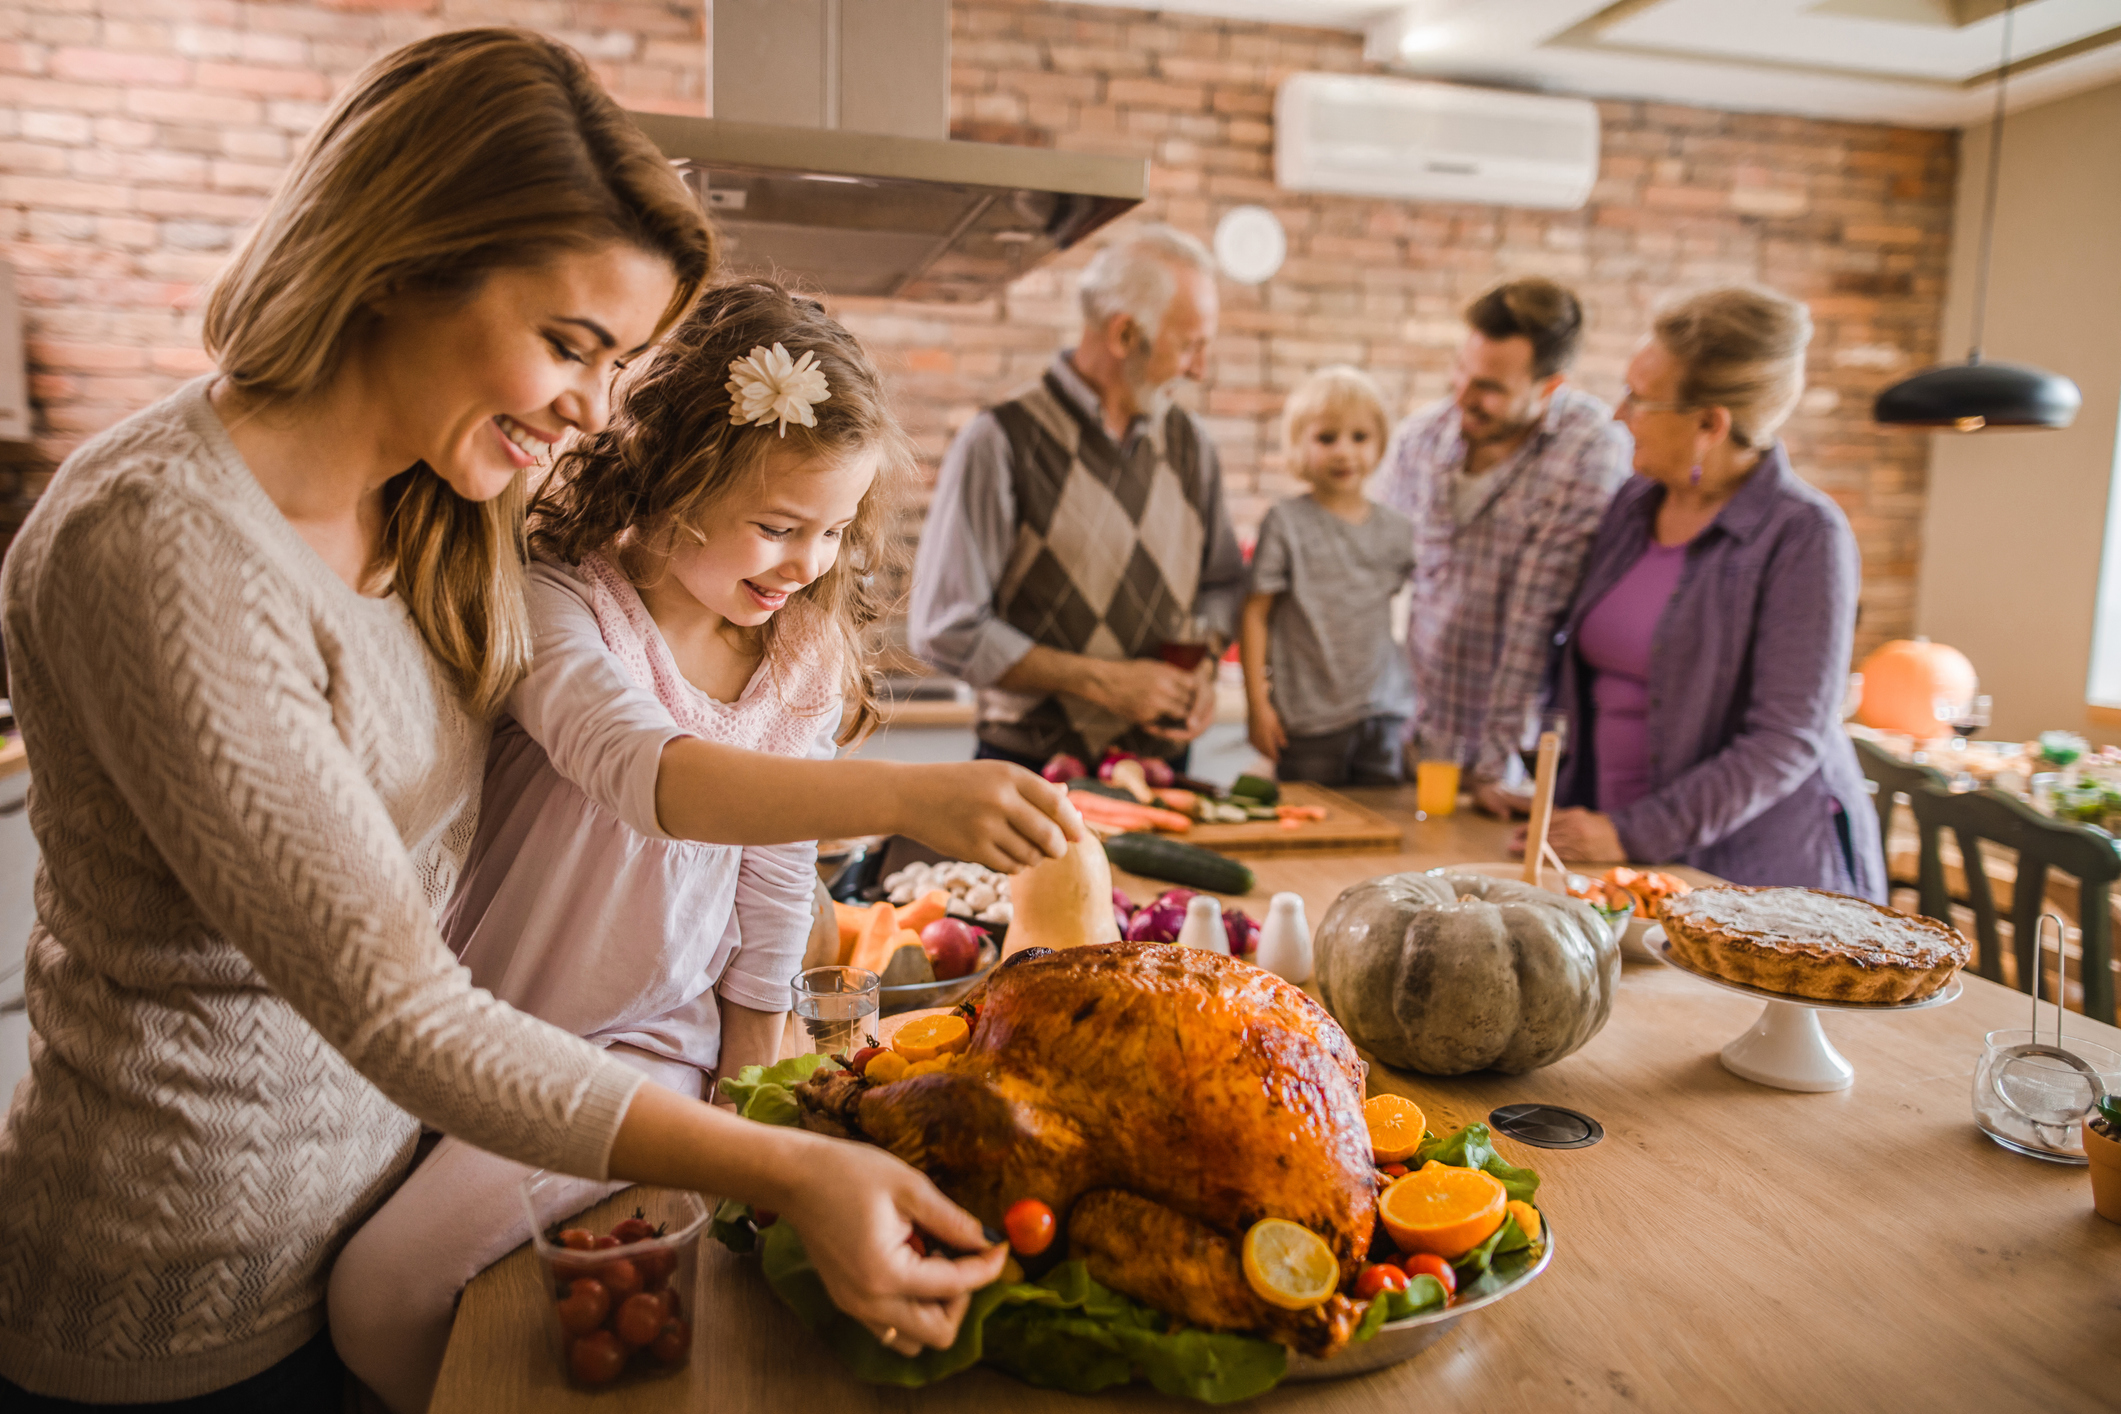 Discover Thanksgiving 2022 Shopping in Garland at Northstar Plaza